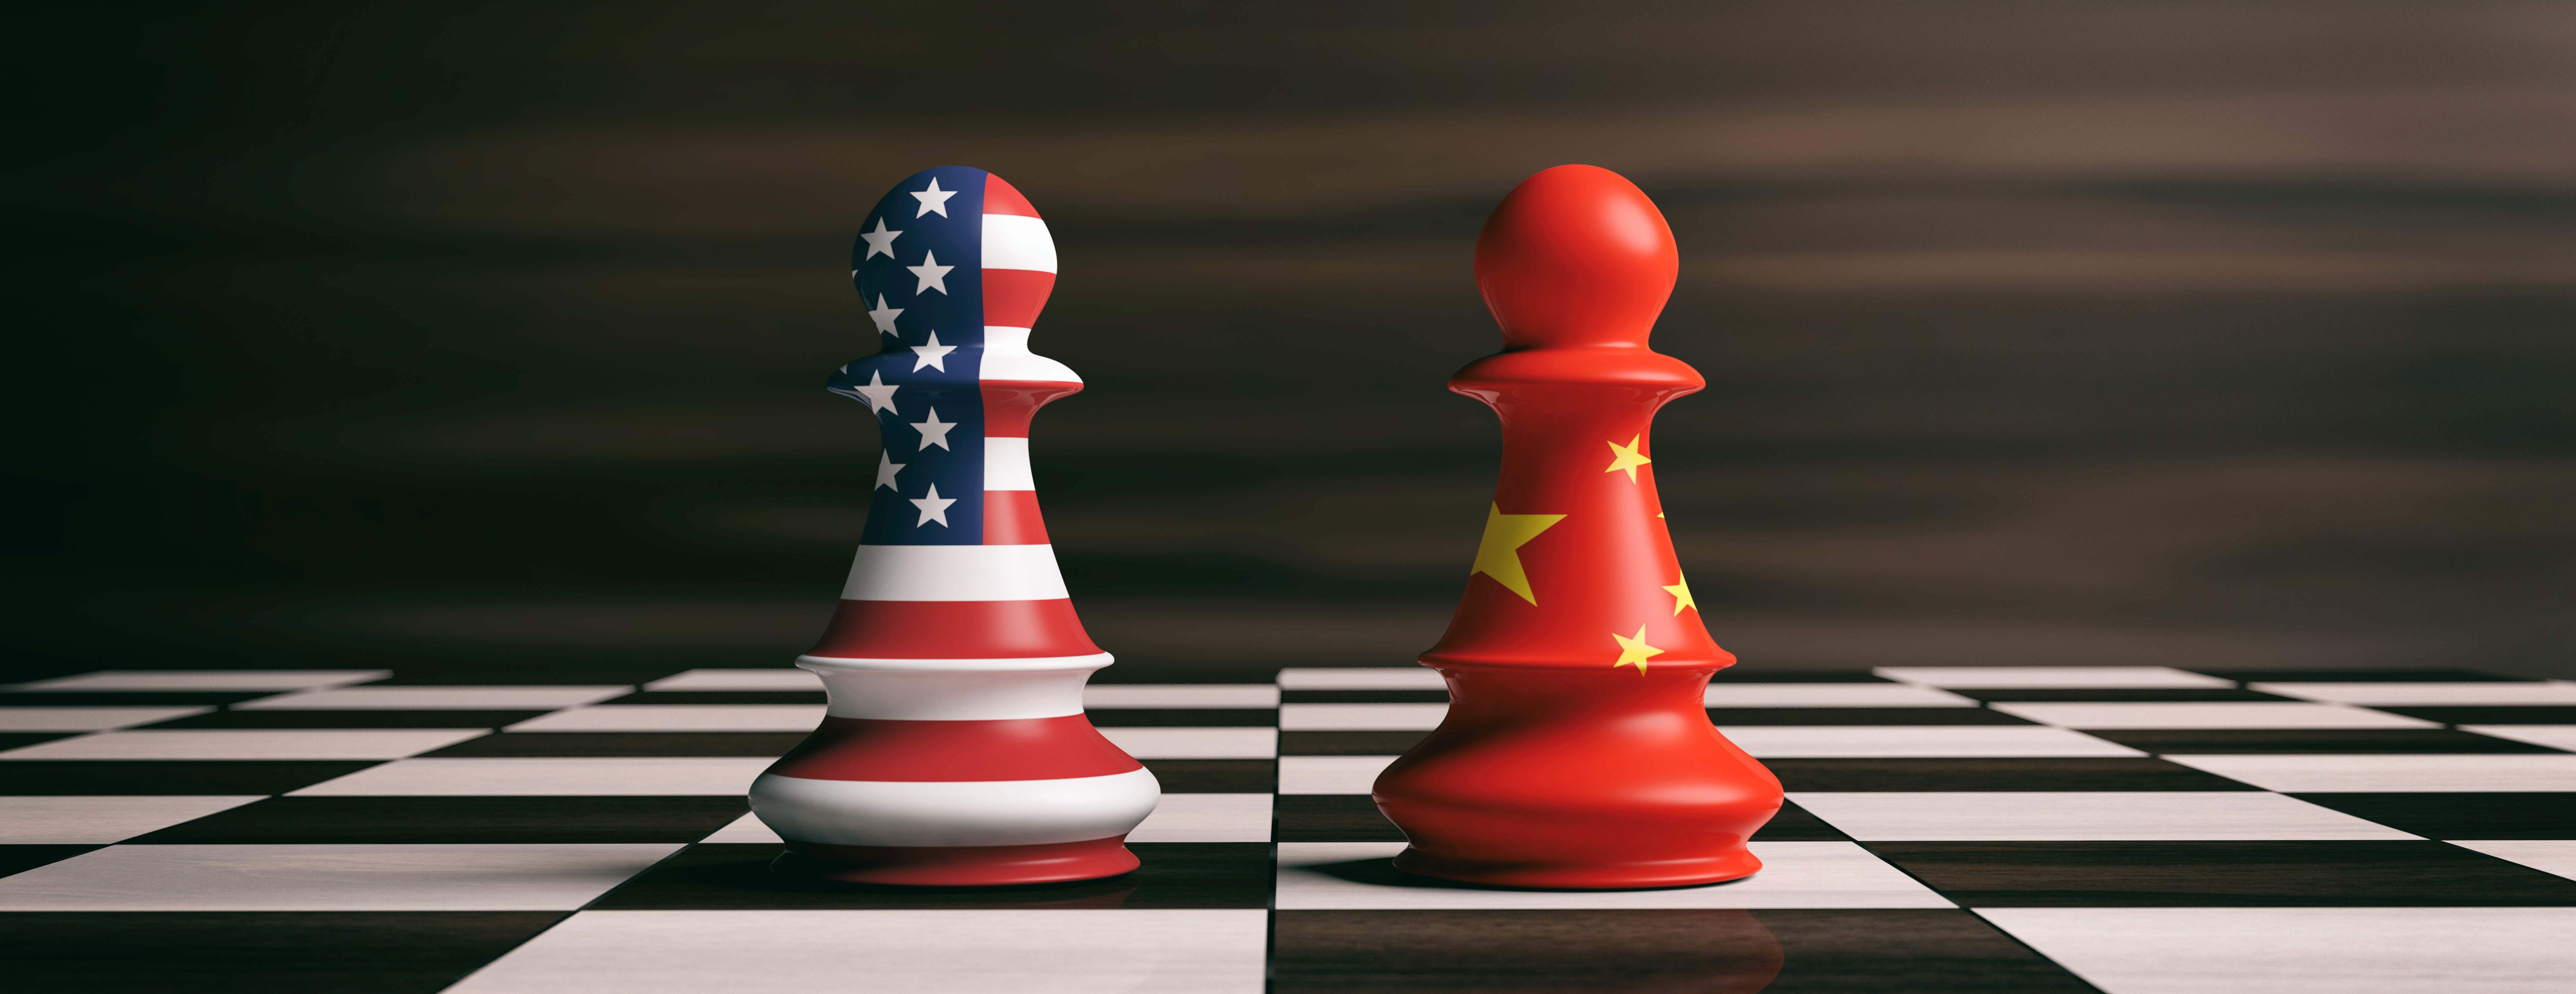 After Alaska: Reassessing U.S.-China Security Policy